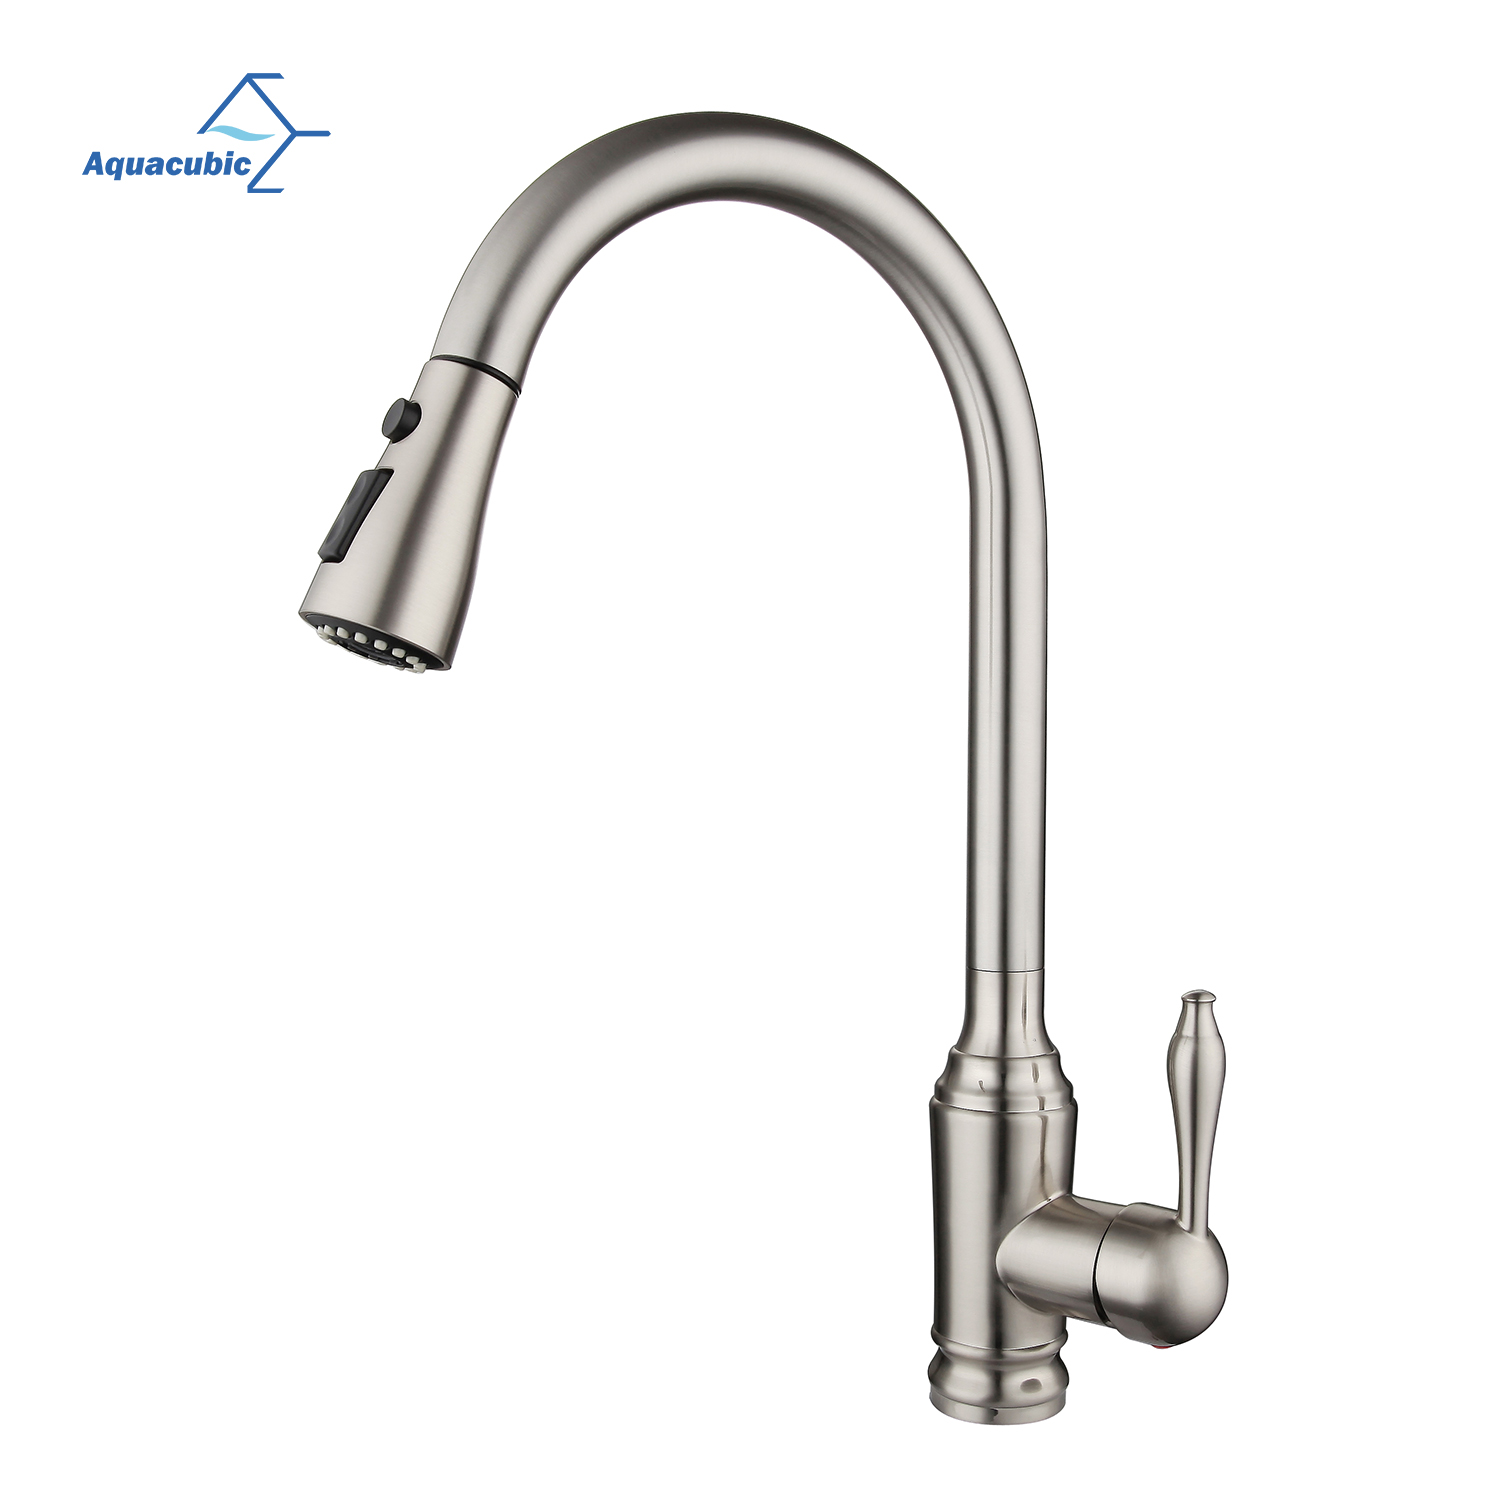 Aquacubic cUPC Single Lever High Arc Gooseneck Kitchen Sink Faucet with 3 Modes Pull Down Sprayer